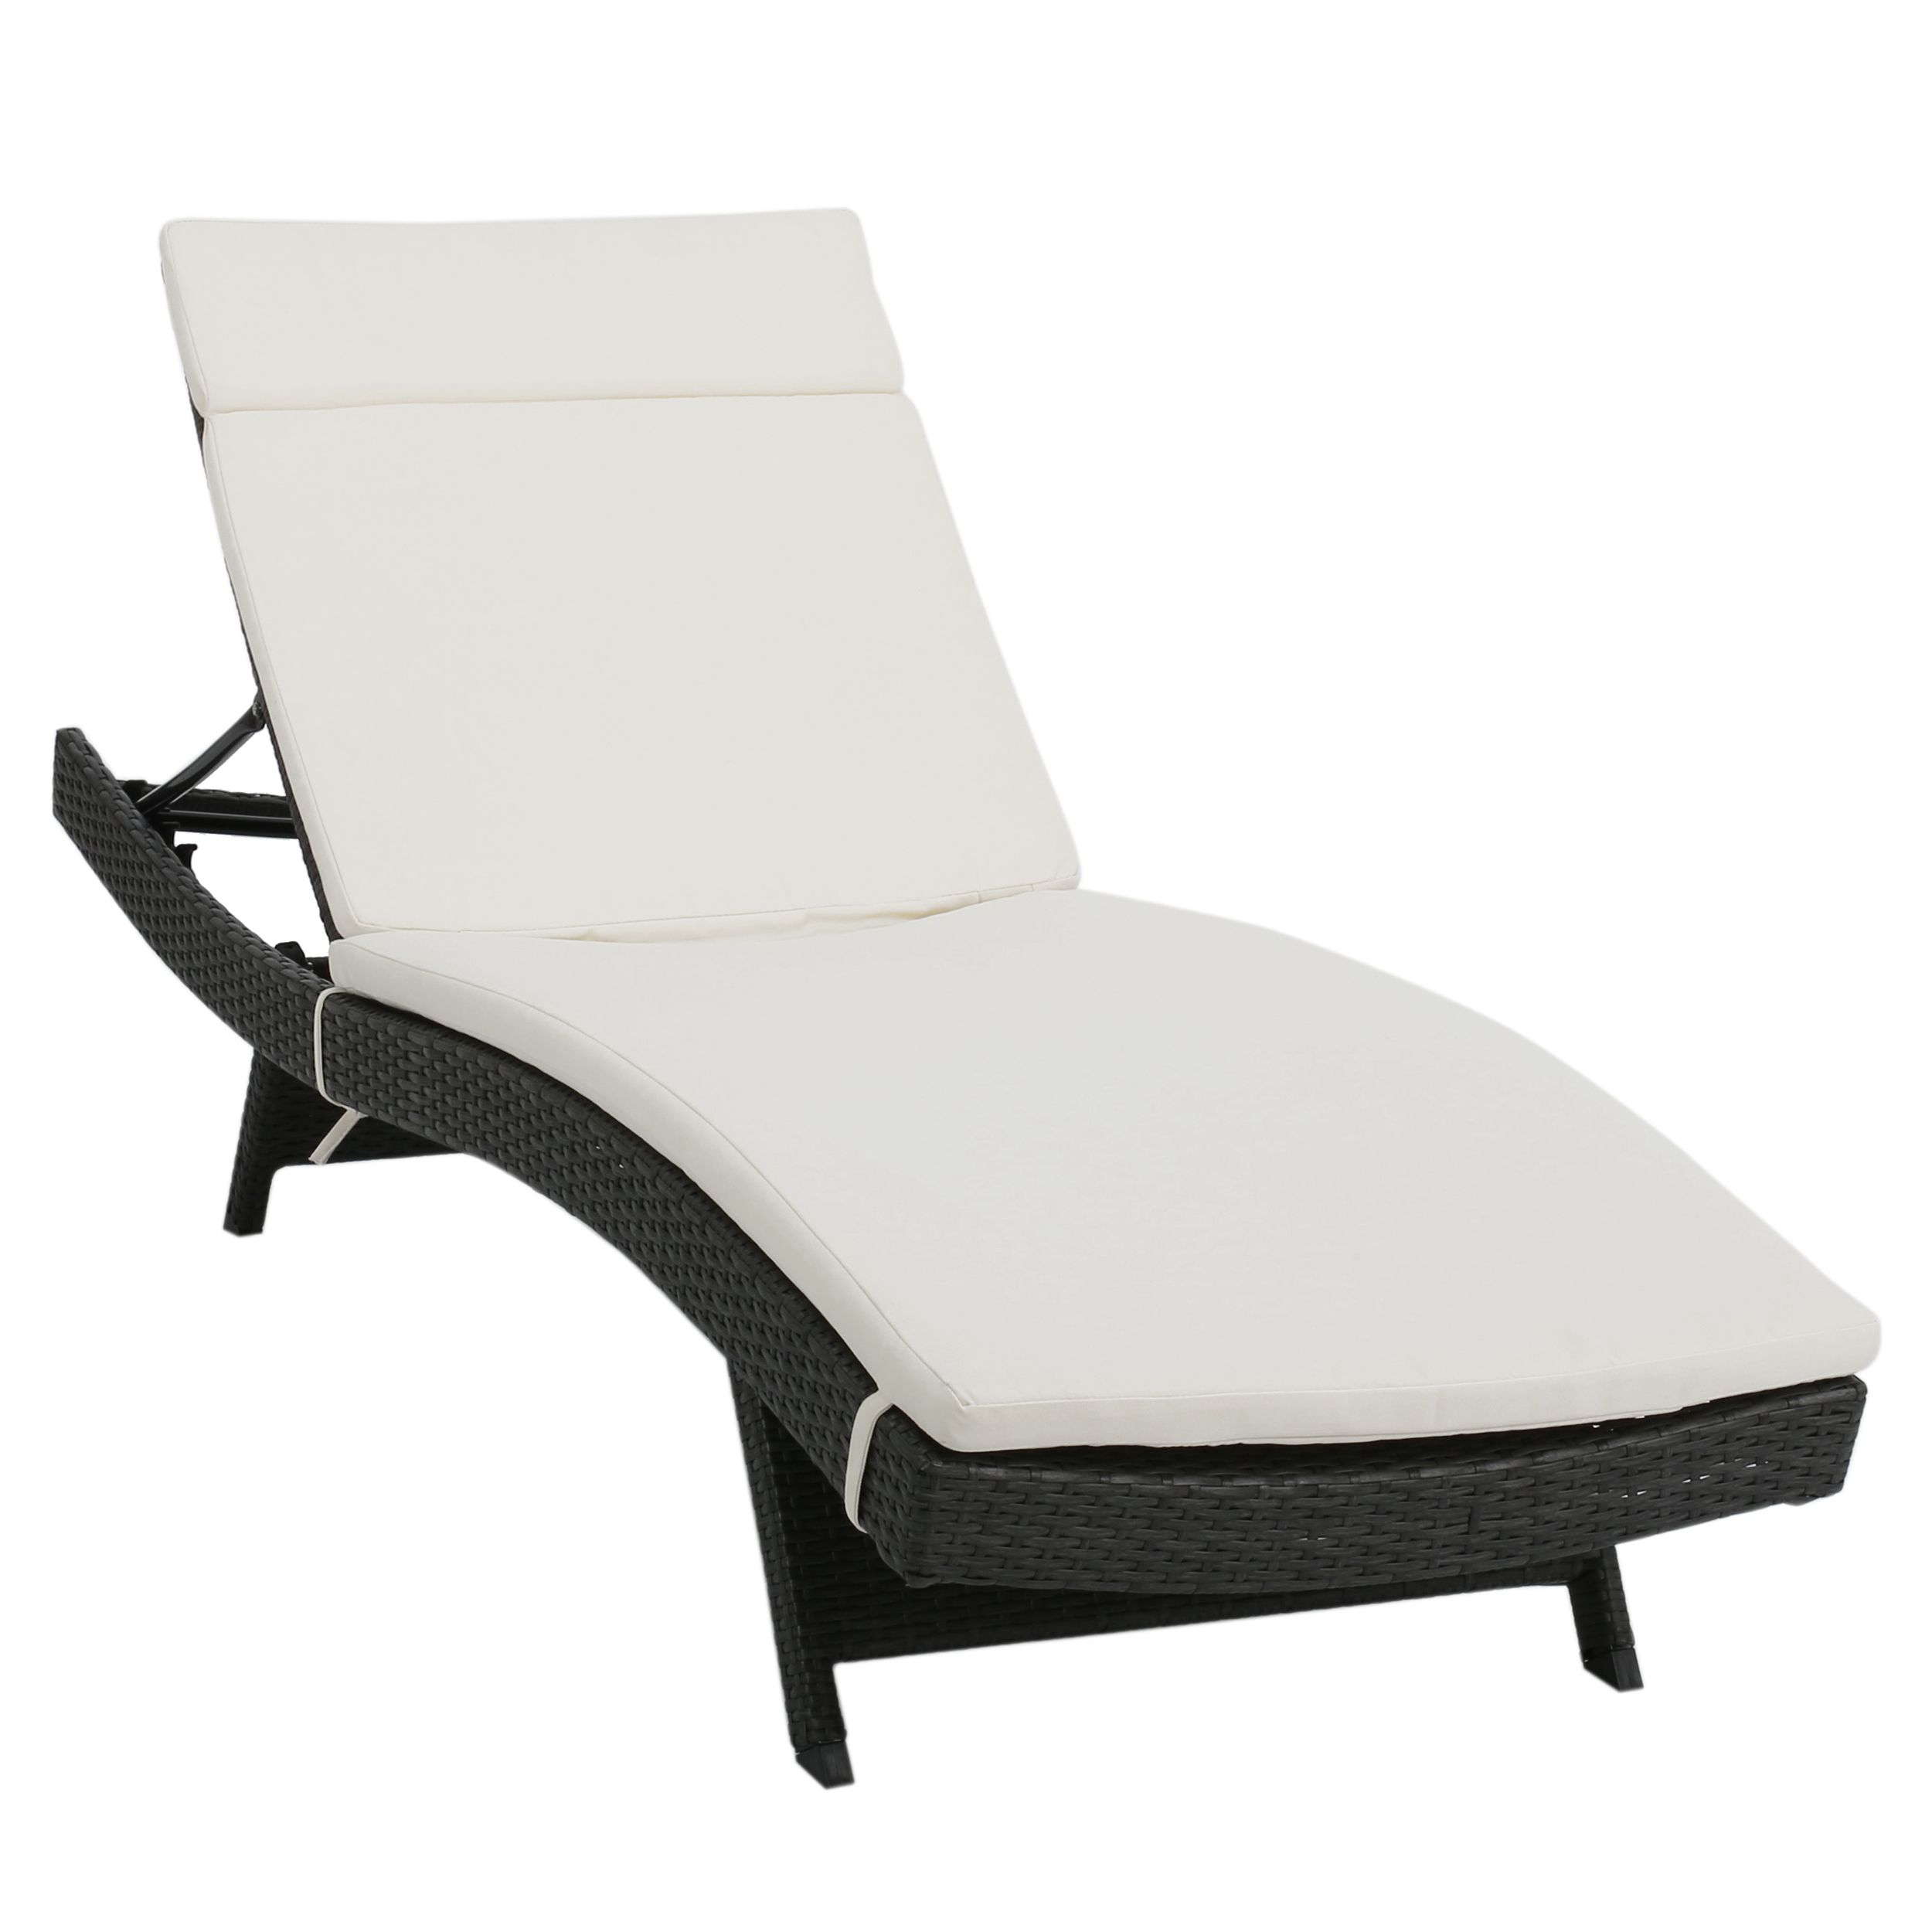 Most Recent Wicker Adjustable Chaise Loungers With Cushion Within Raleigh Outdoor Wicker Adjustable Chaise Lounge With Cushion, Single Set,  Multiple Colors (View 10 of 25)